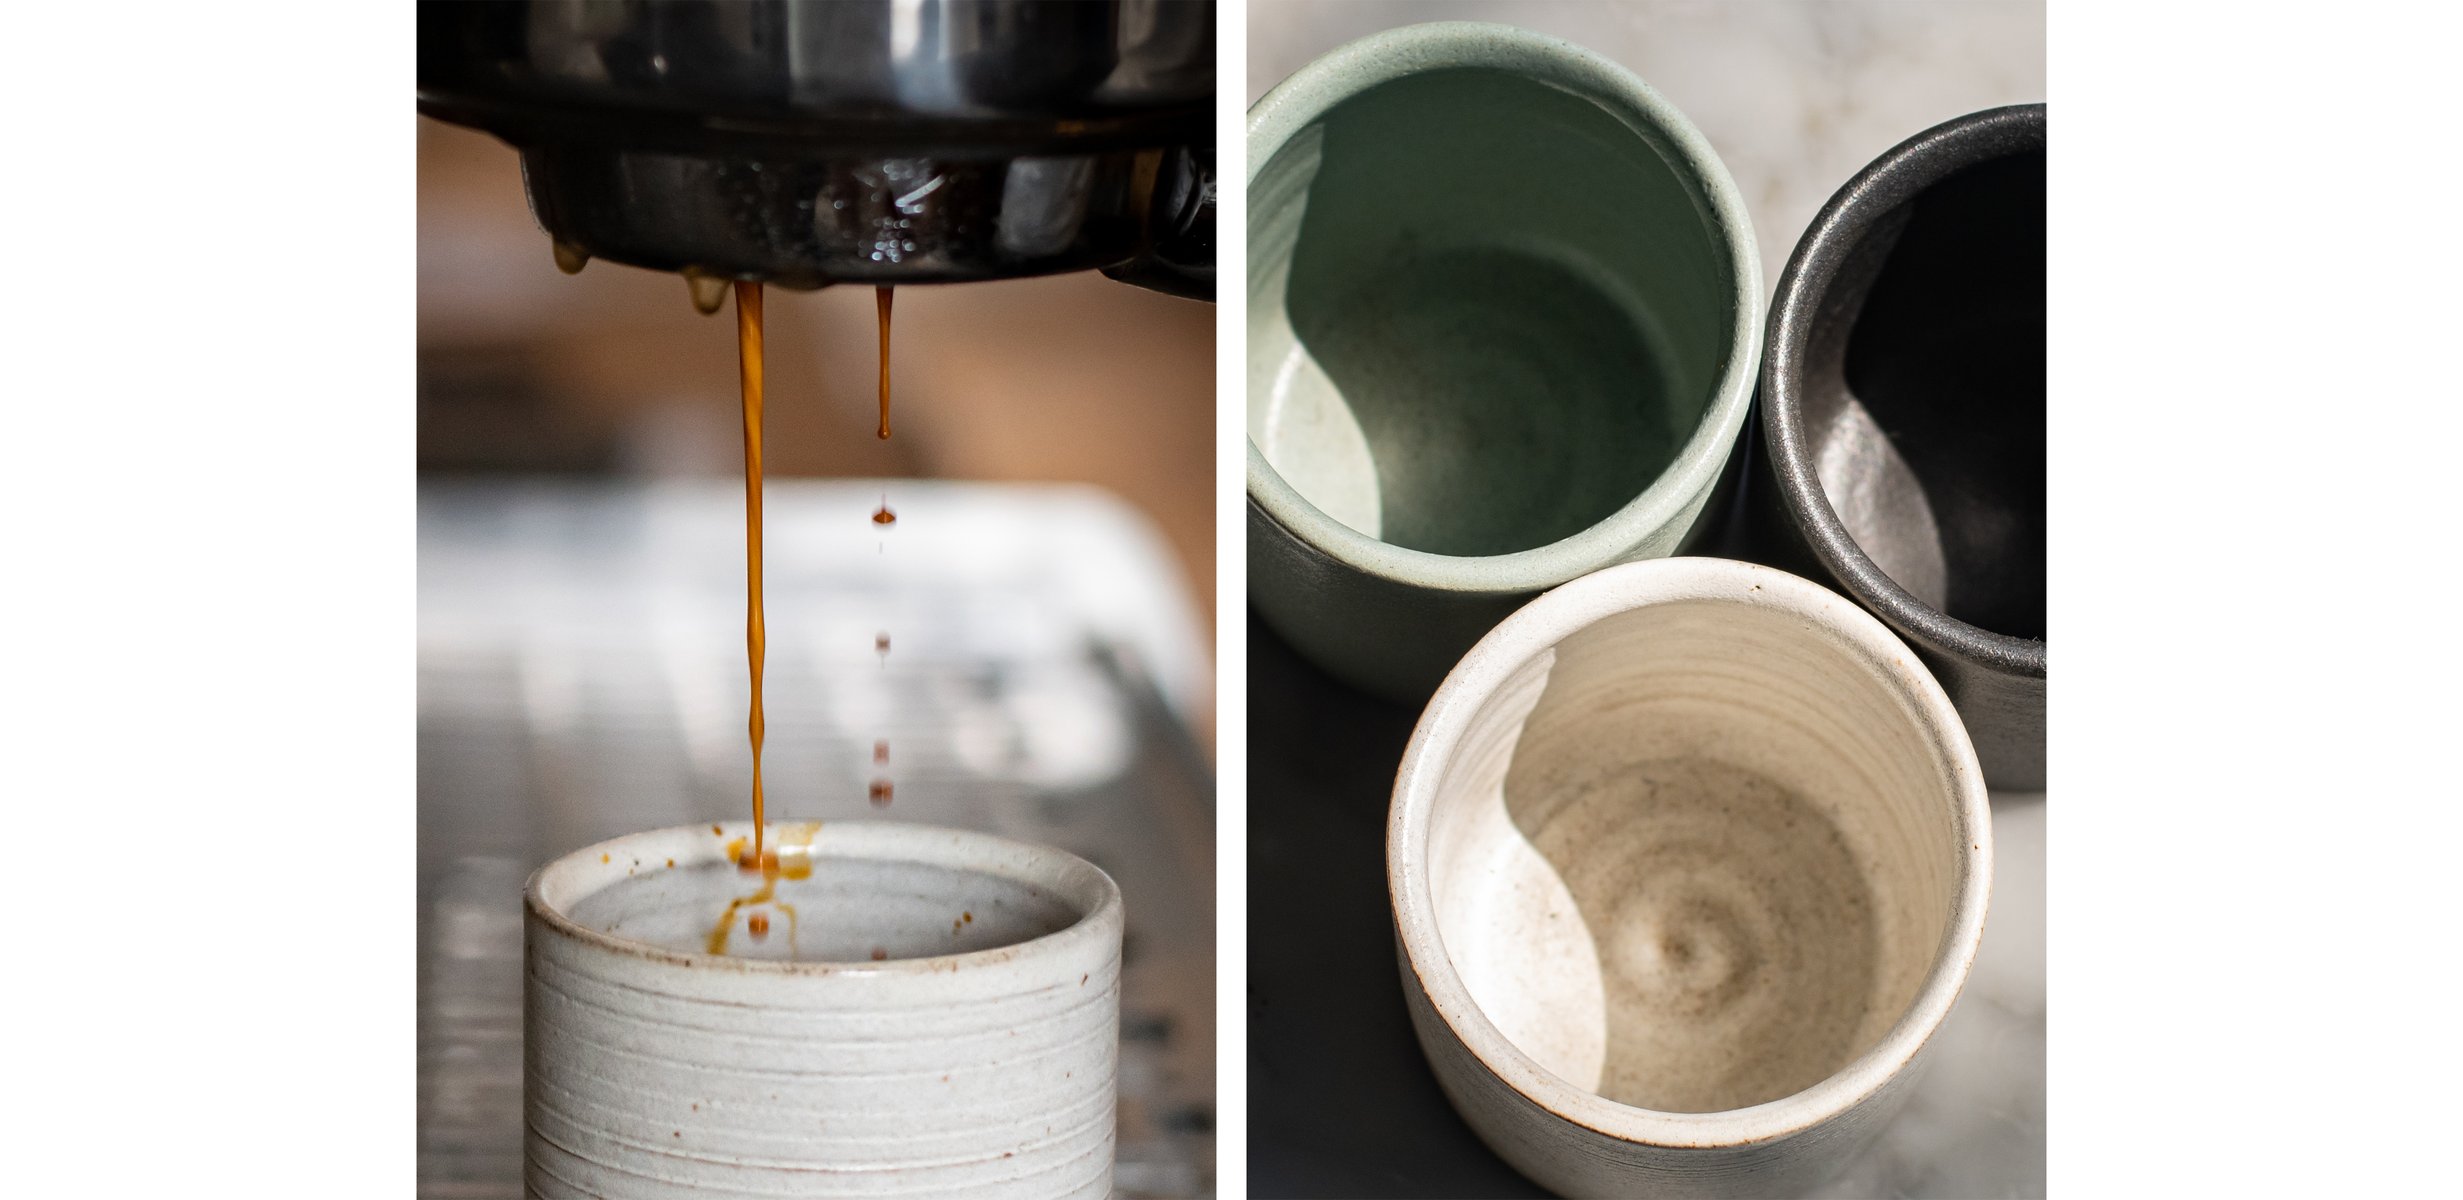  Diptych: 

Left image: a stream of espresso pouring from the portafilter of an espresso machine and into an off-white, stoneware cup.

Right image: a close-up image of three stoneware cups: sea foam green, black, and white, clockwise from top left. by Sydney SG